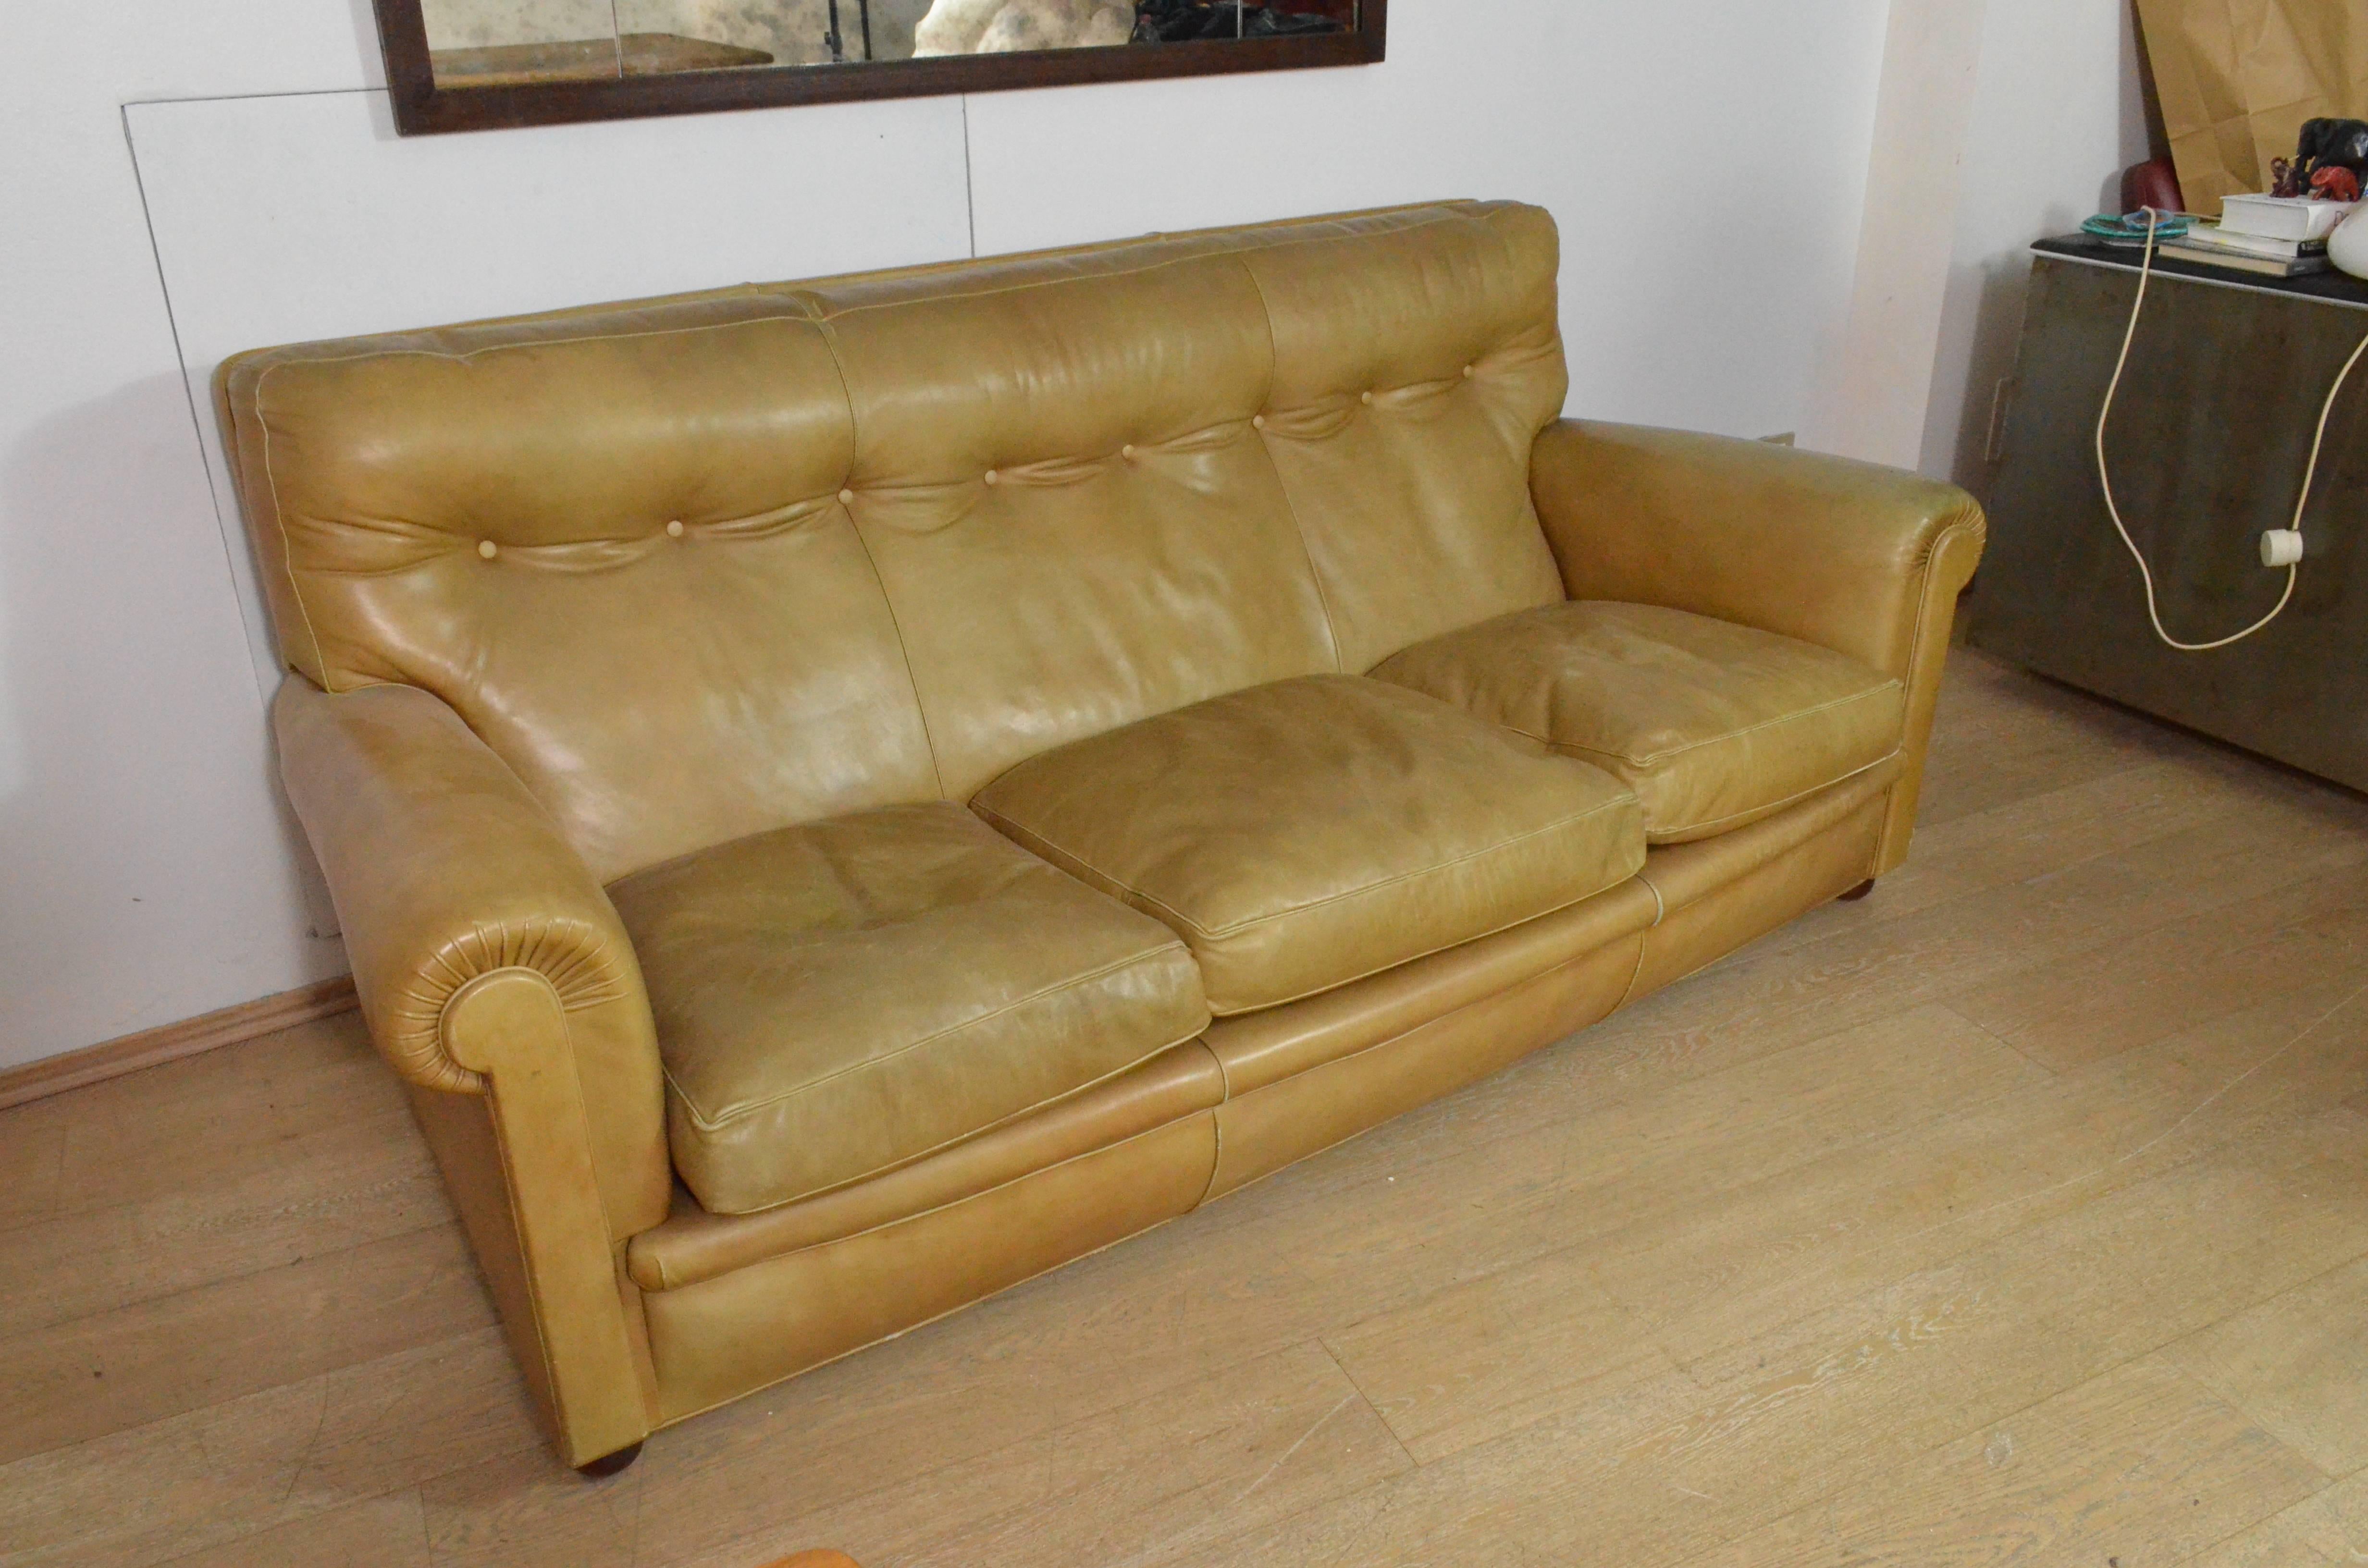 Vintage sofa signed and marked Poltrona Frau. Model “Edoardo” from 1962. The leather, which is cognac color, is in very good vintage condition coherent with age and prior use. We have done a conservative restoration aimed at smoothing the leather.